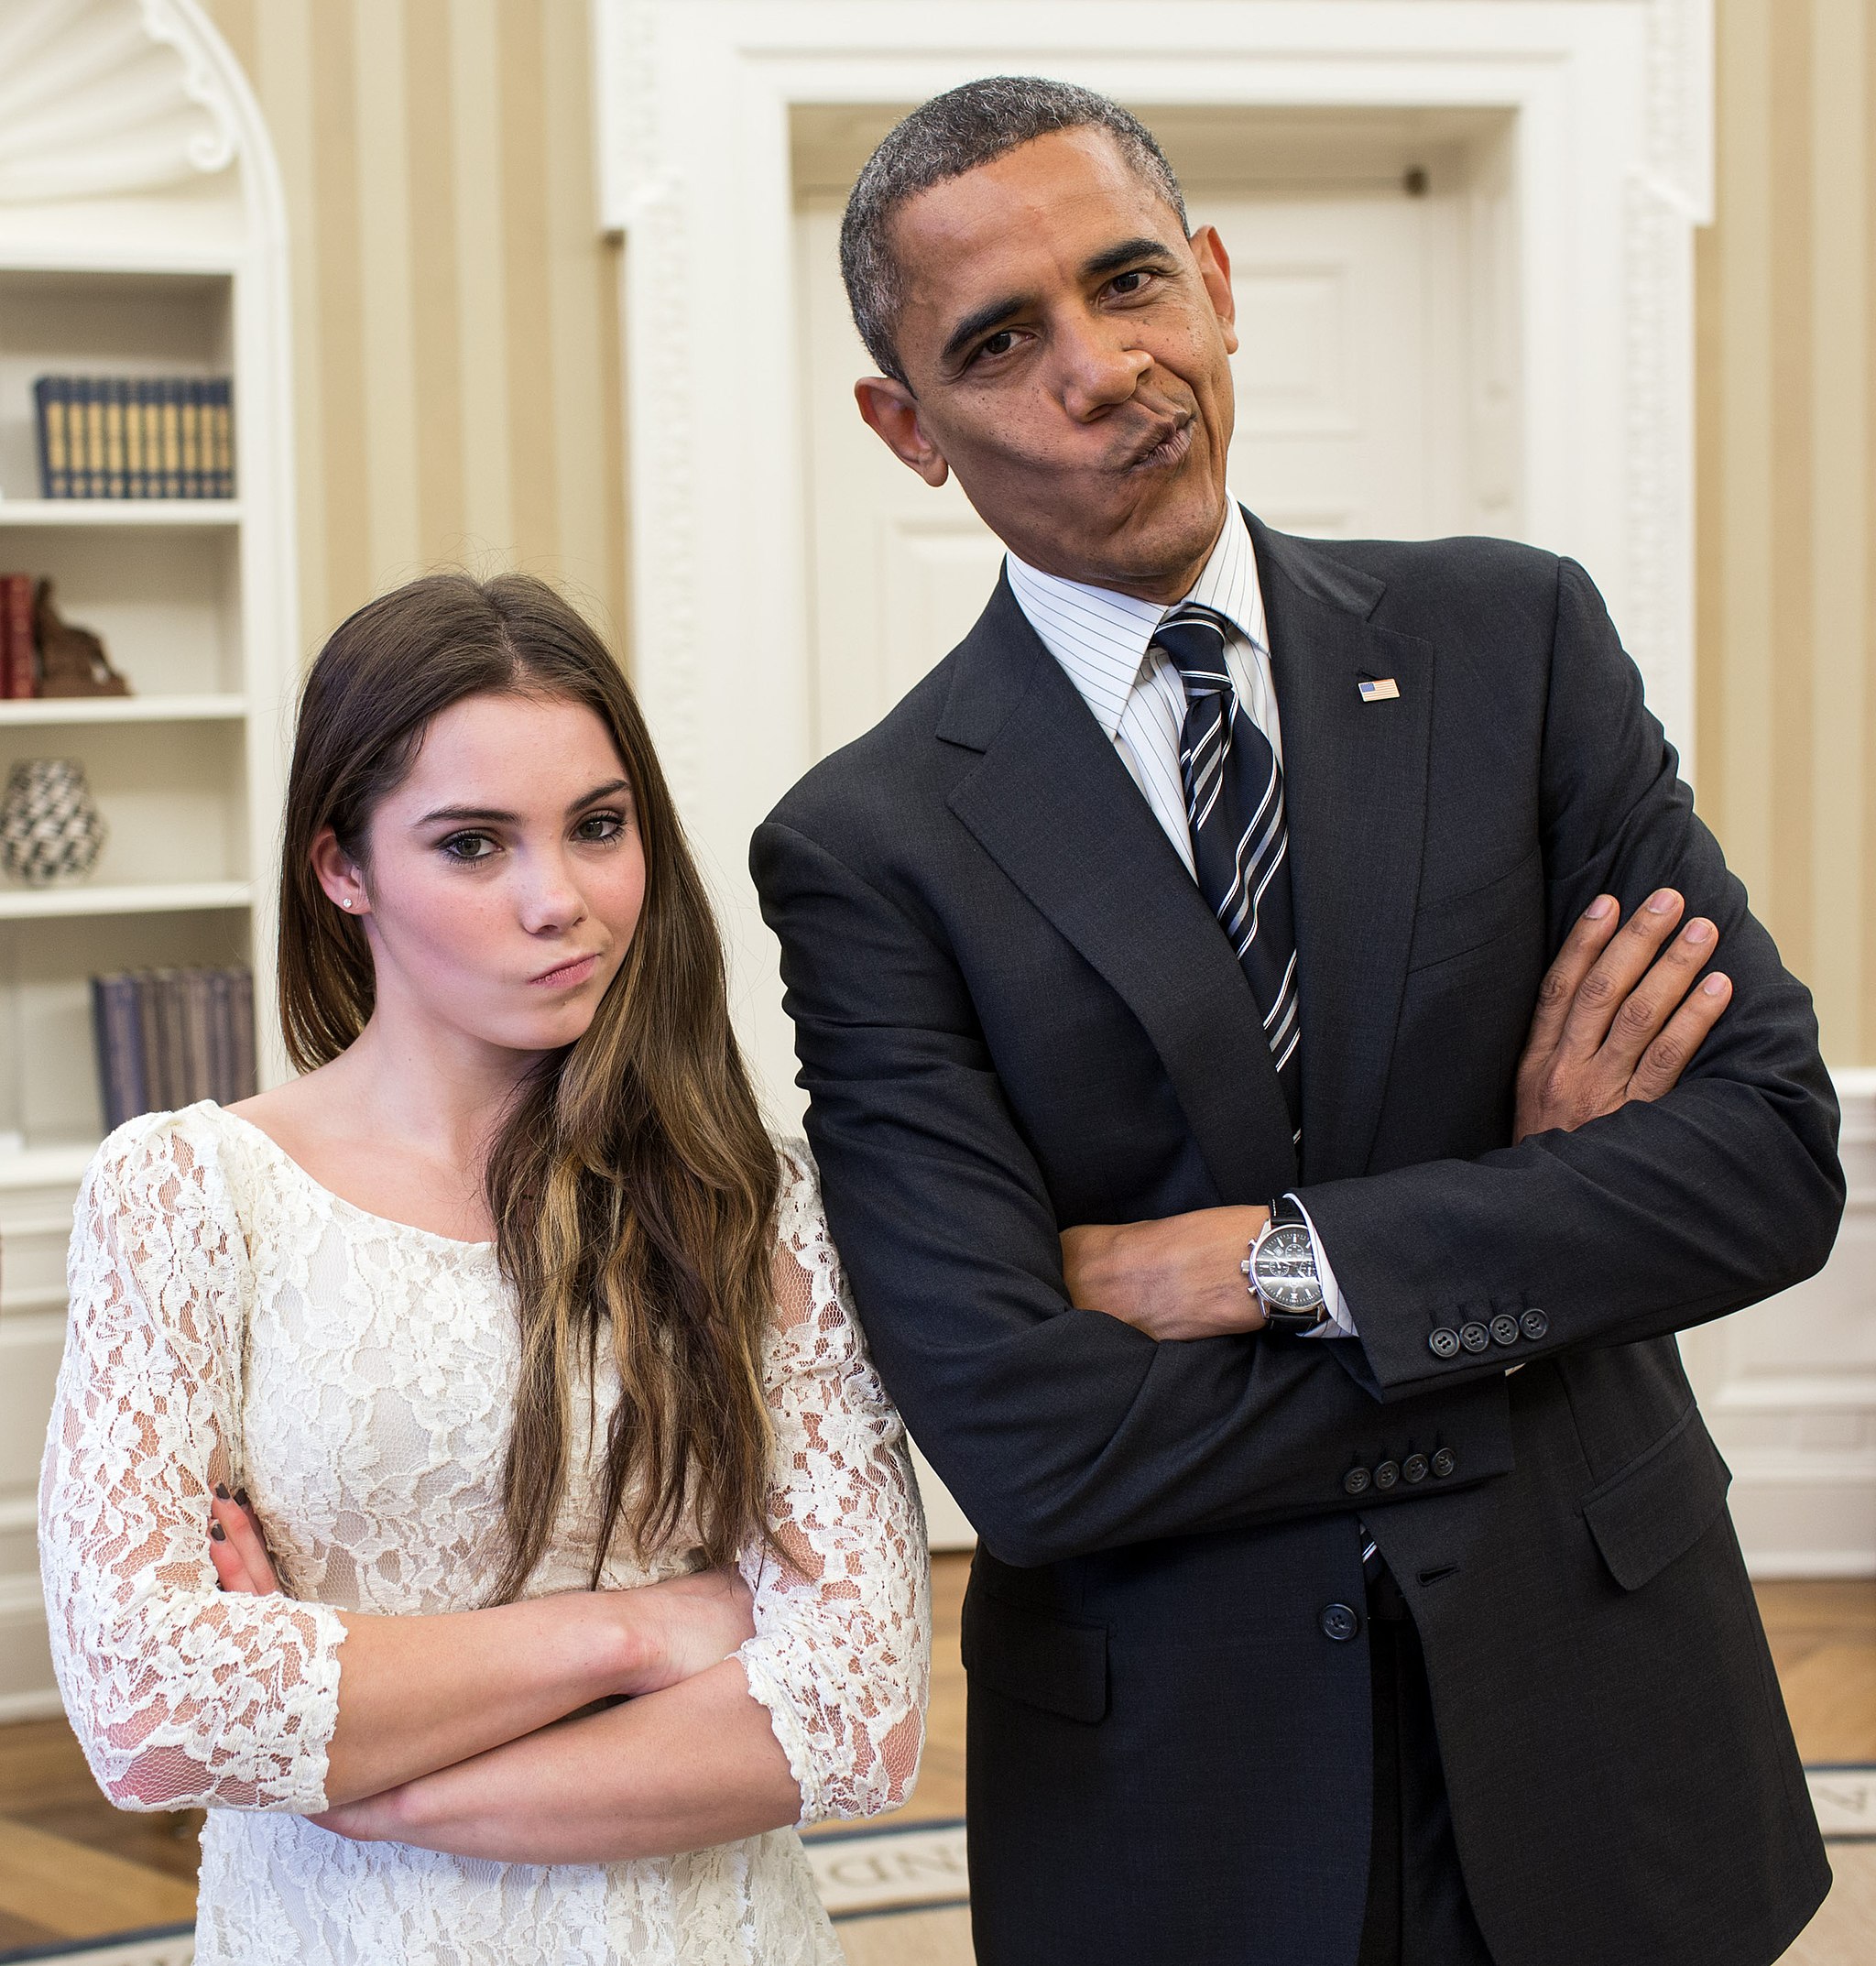 President Obama standing next to a young white woman. Both have their arms folding and a silly pout on their faces. President Obama is slightly leaning toward the young woman.